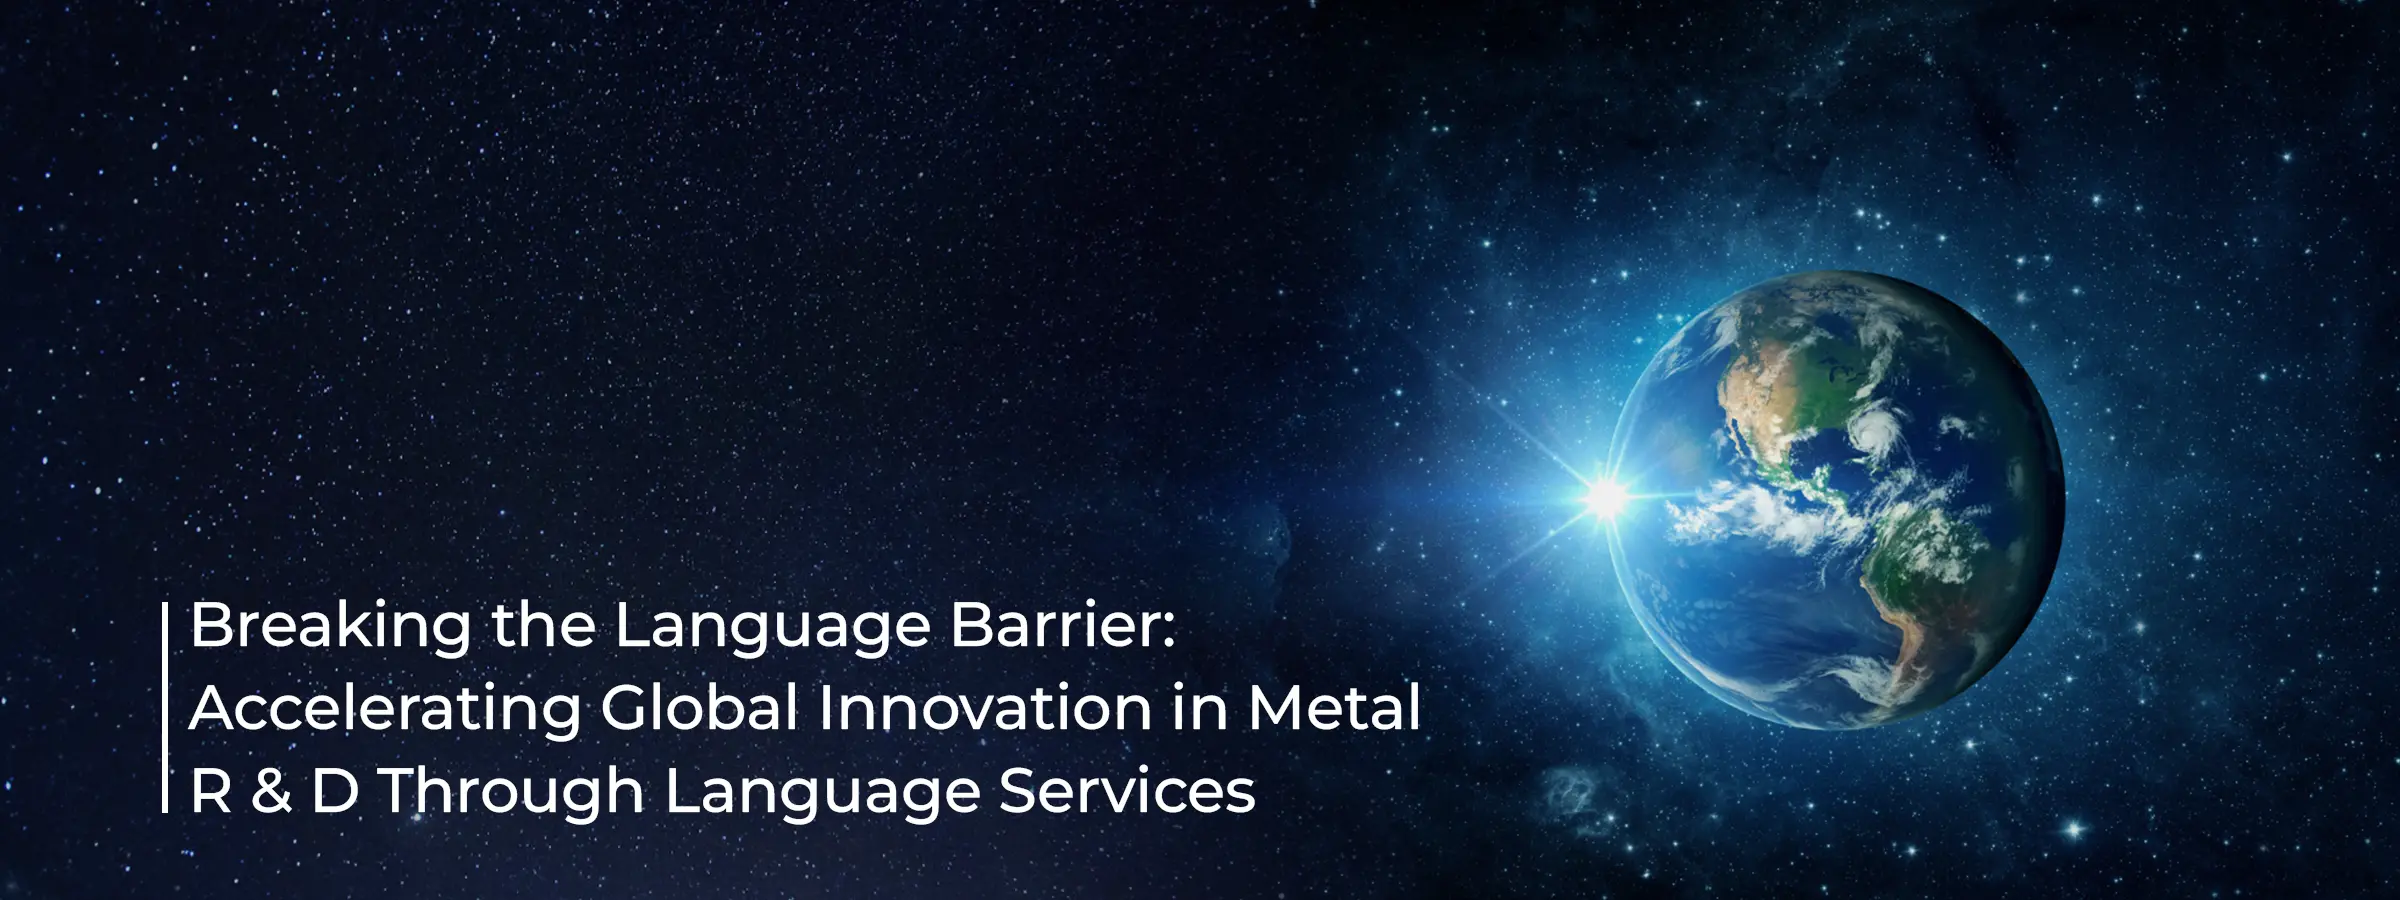 breaking-the-language-barrier-accelerating-global-innovation-in-metal-rd-through-language-services